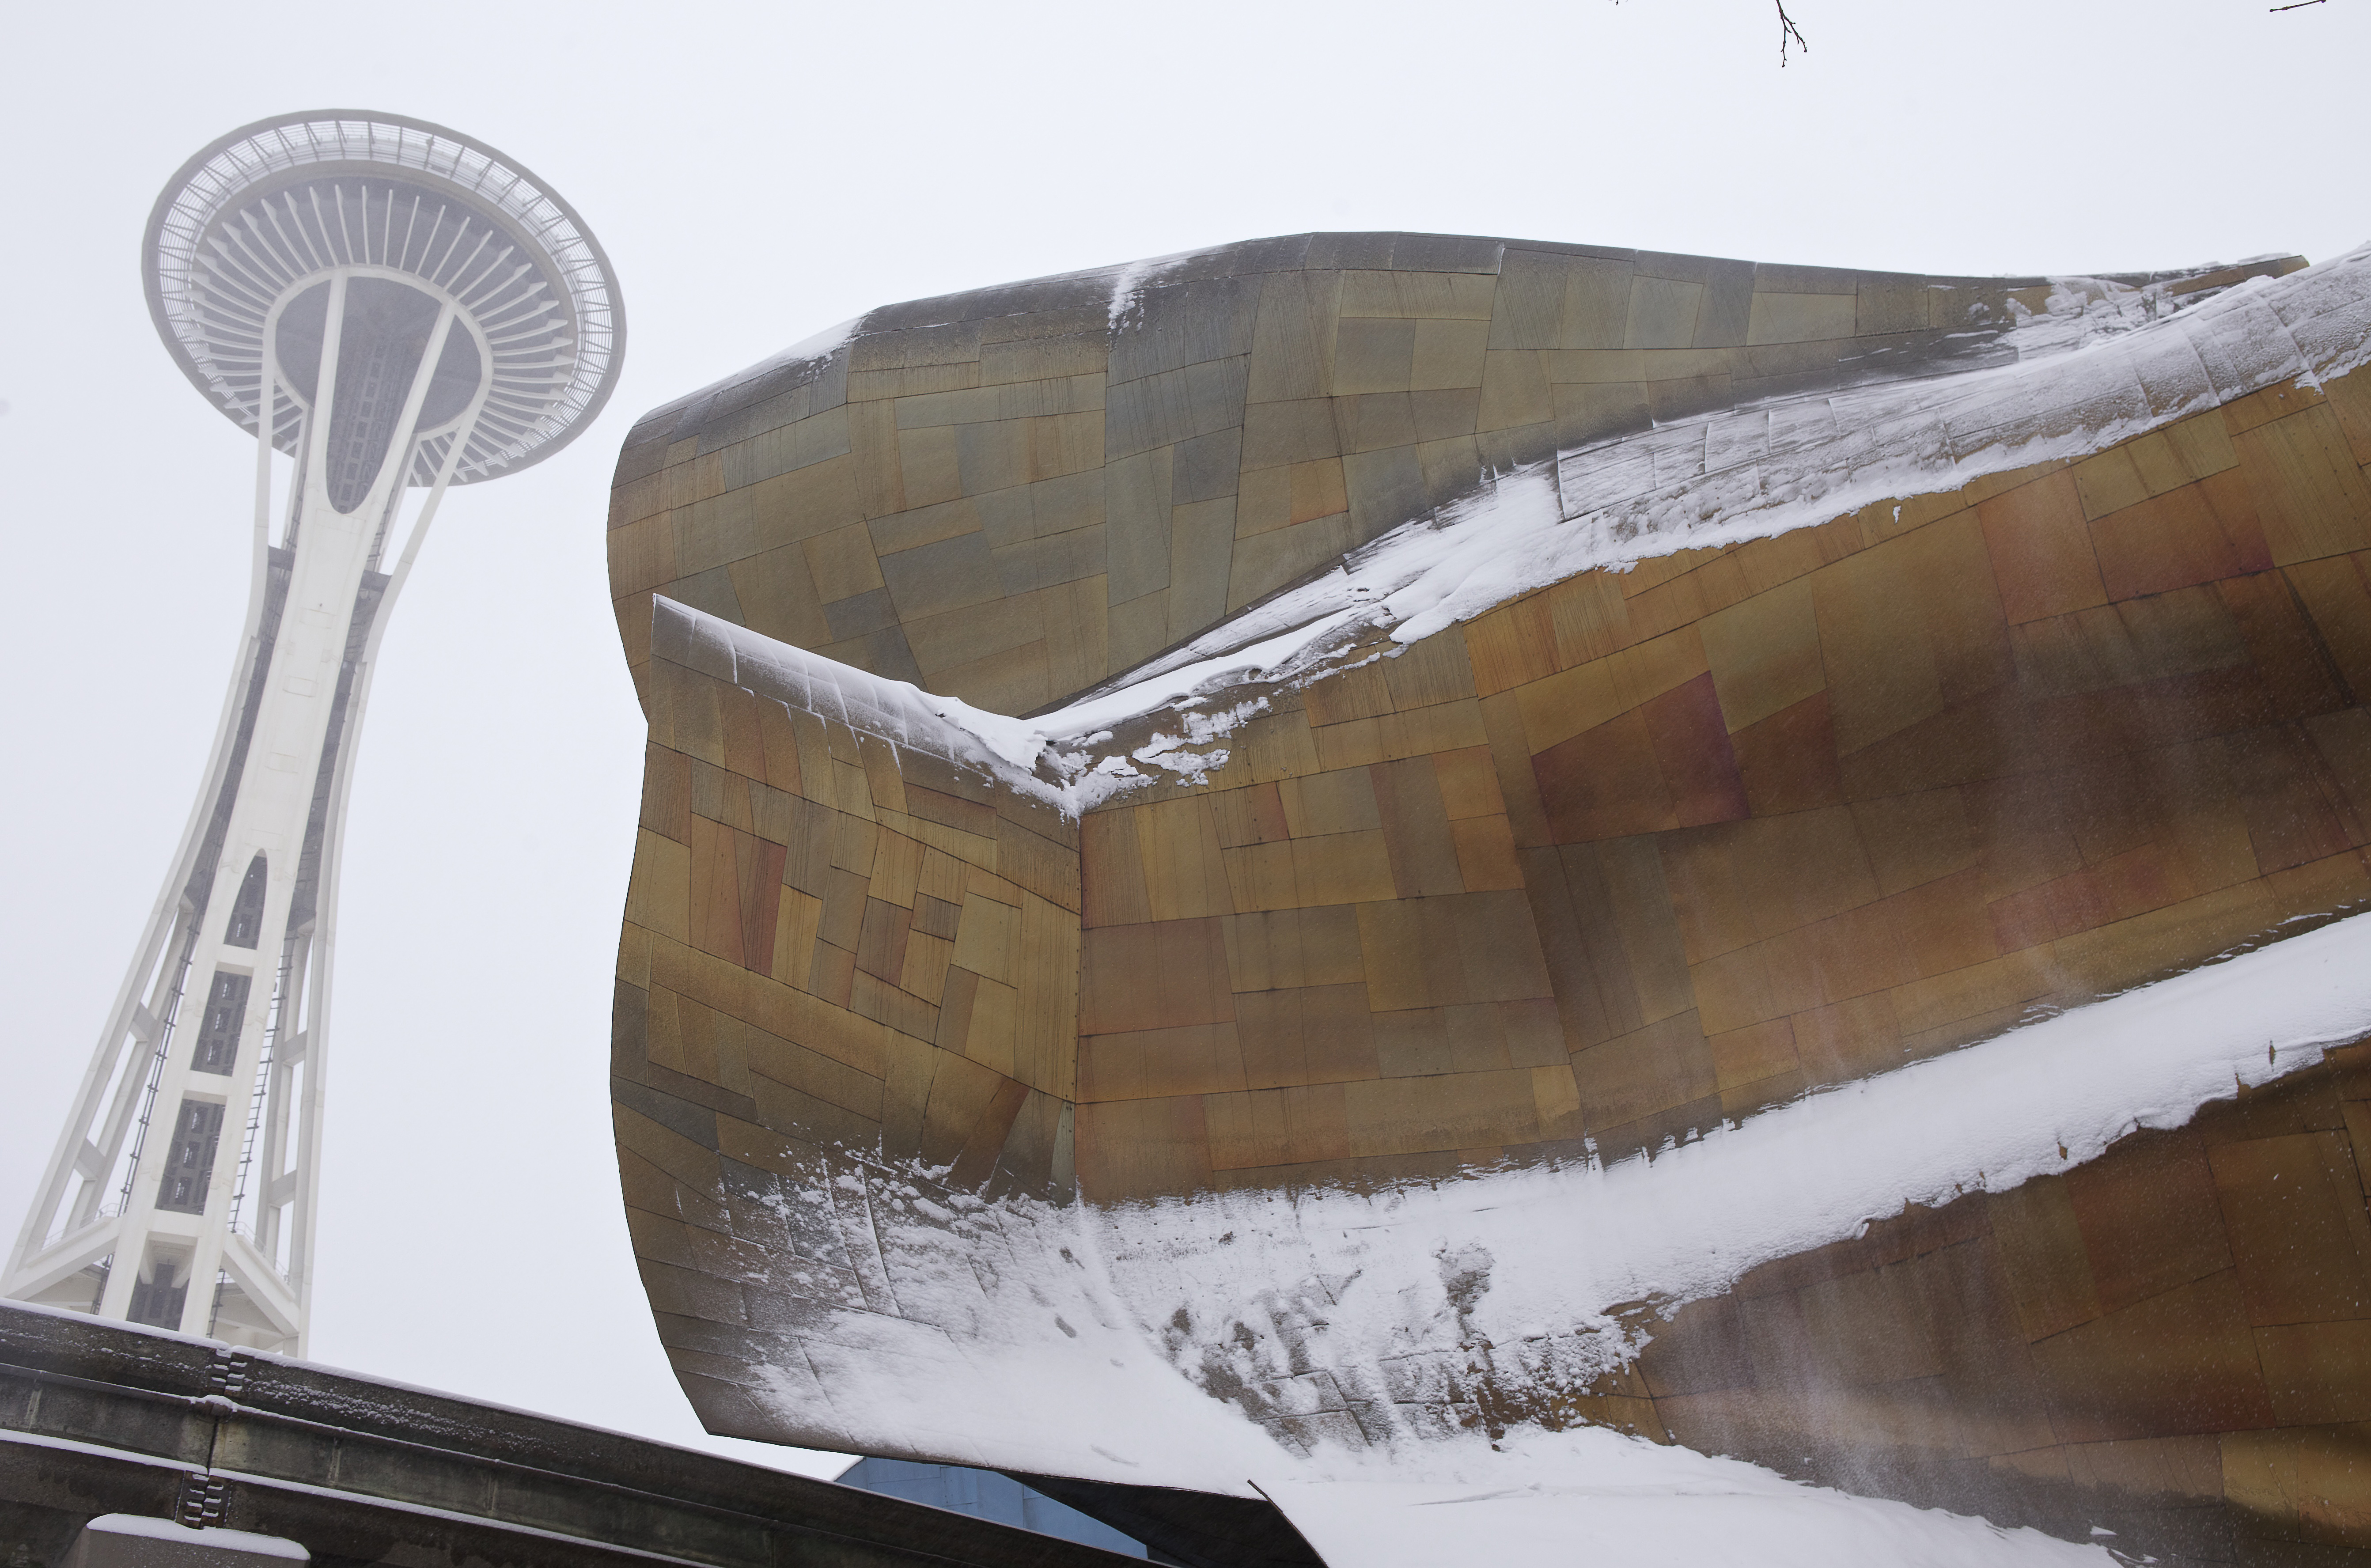 The Space Needle viewed from below, with EMP (a bendy wall of metal) in the foreground to the right